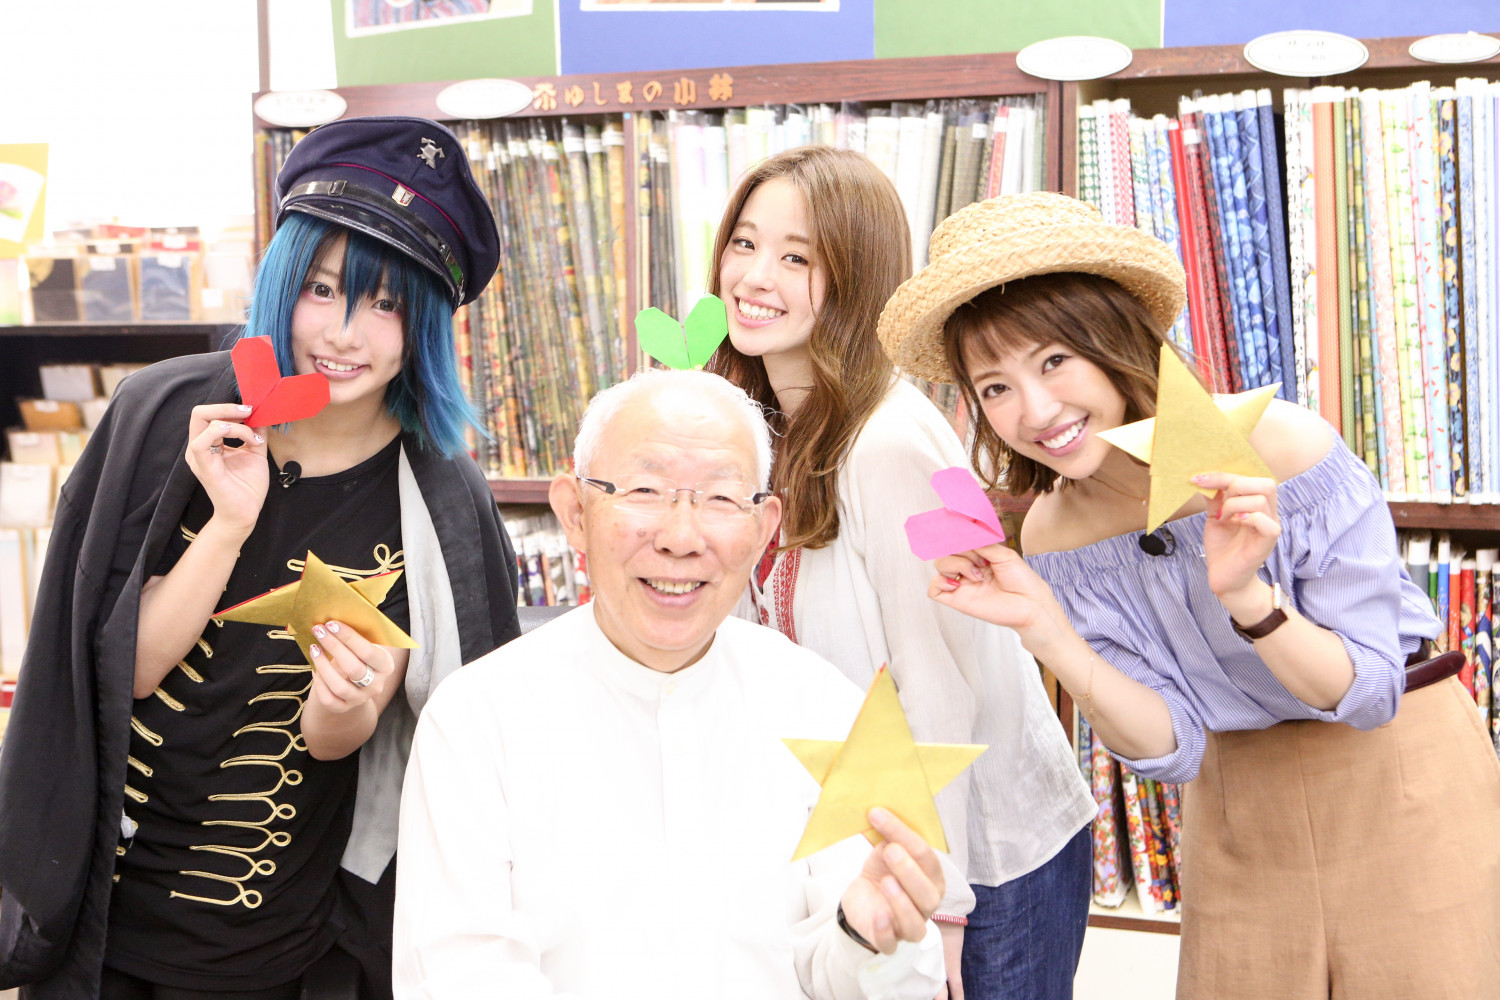 Both Seeing and Experiencing Are Fun! Folding Origami Challenge at “Ochanomizu Origami Kaikan”